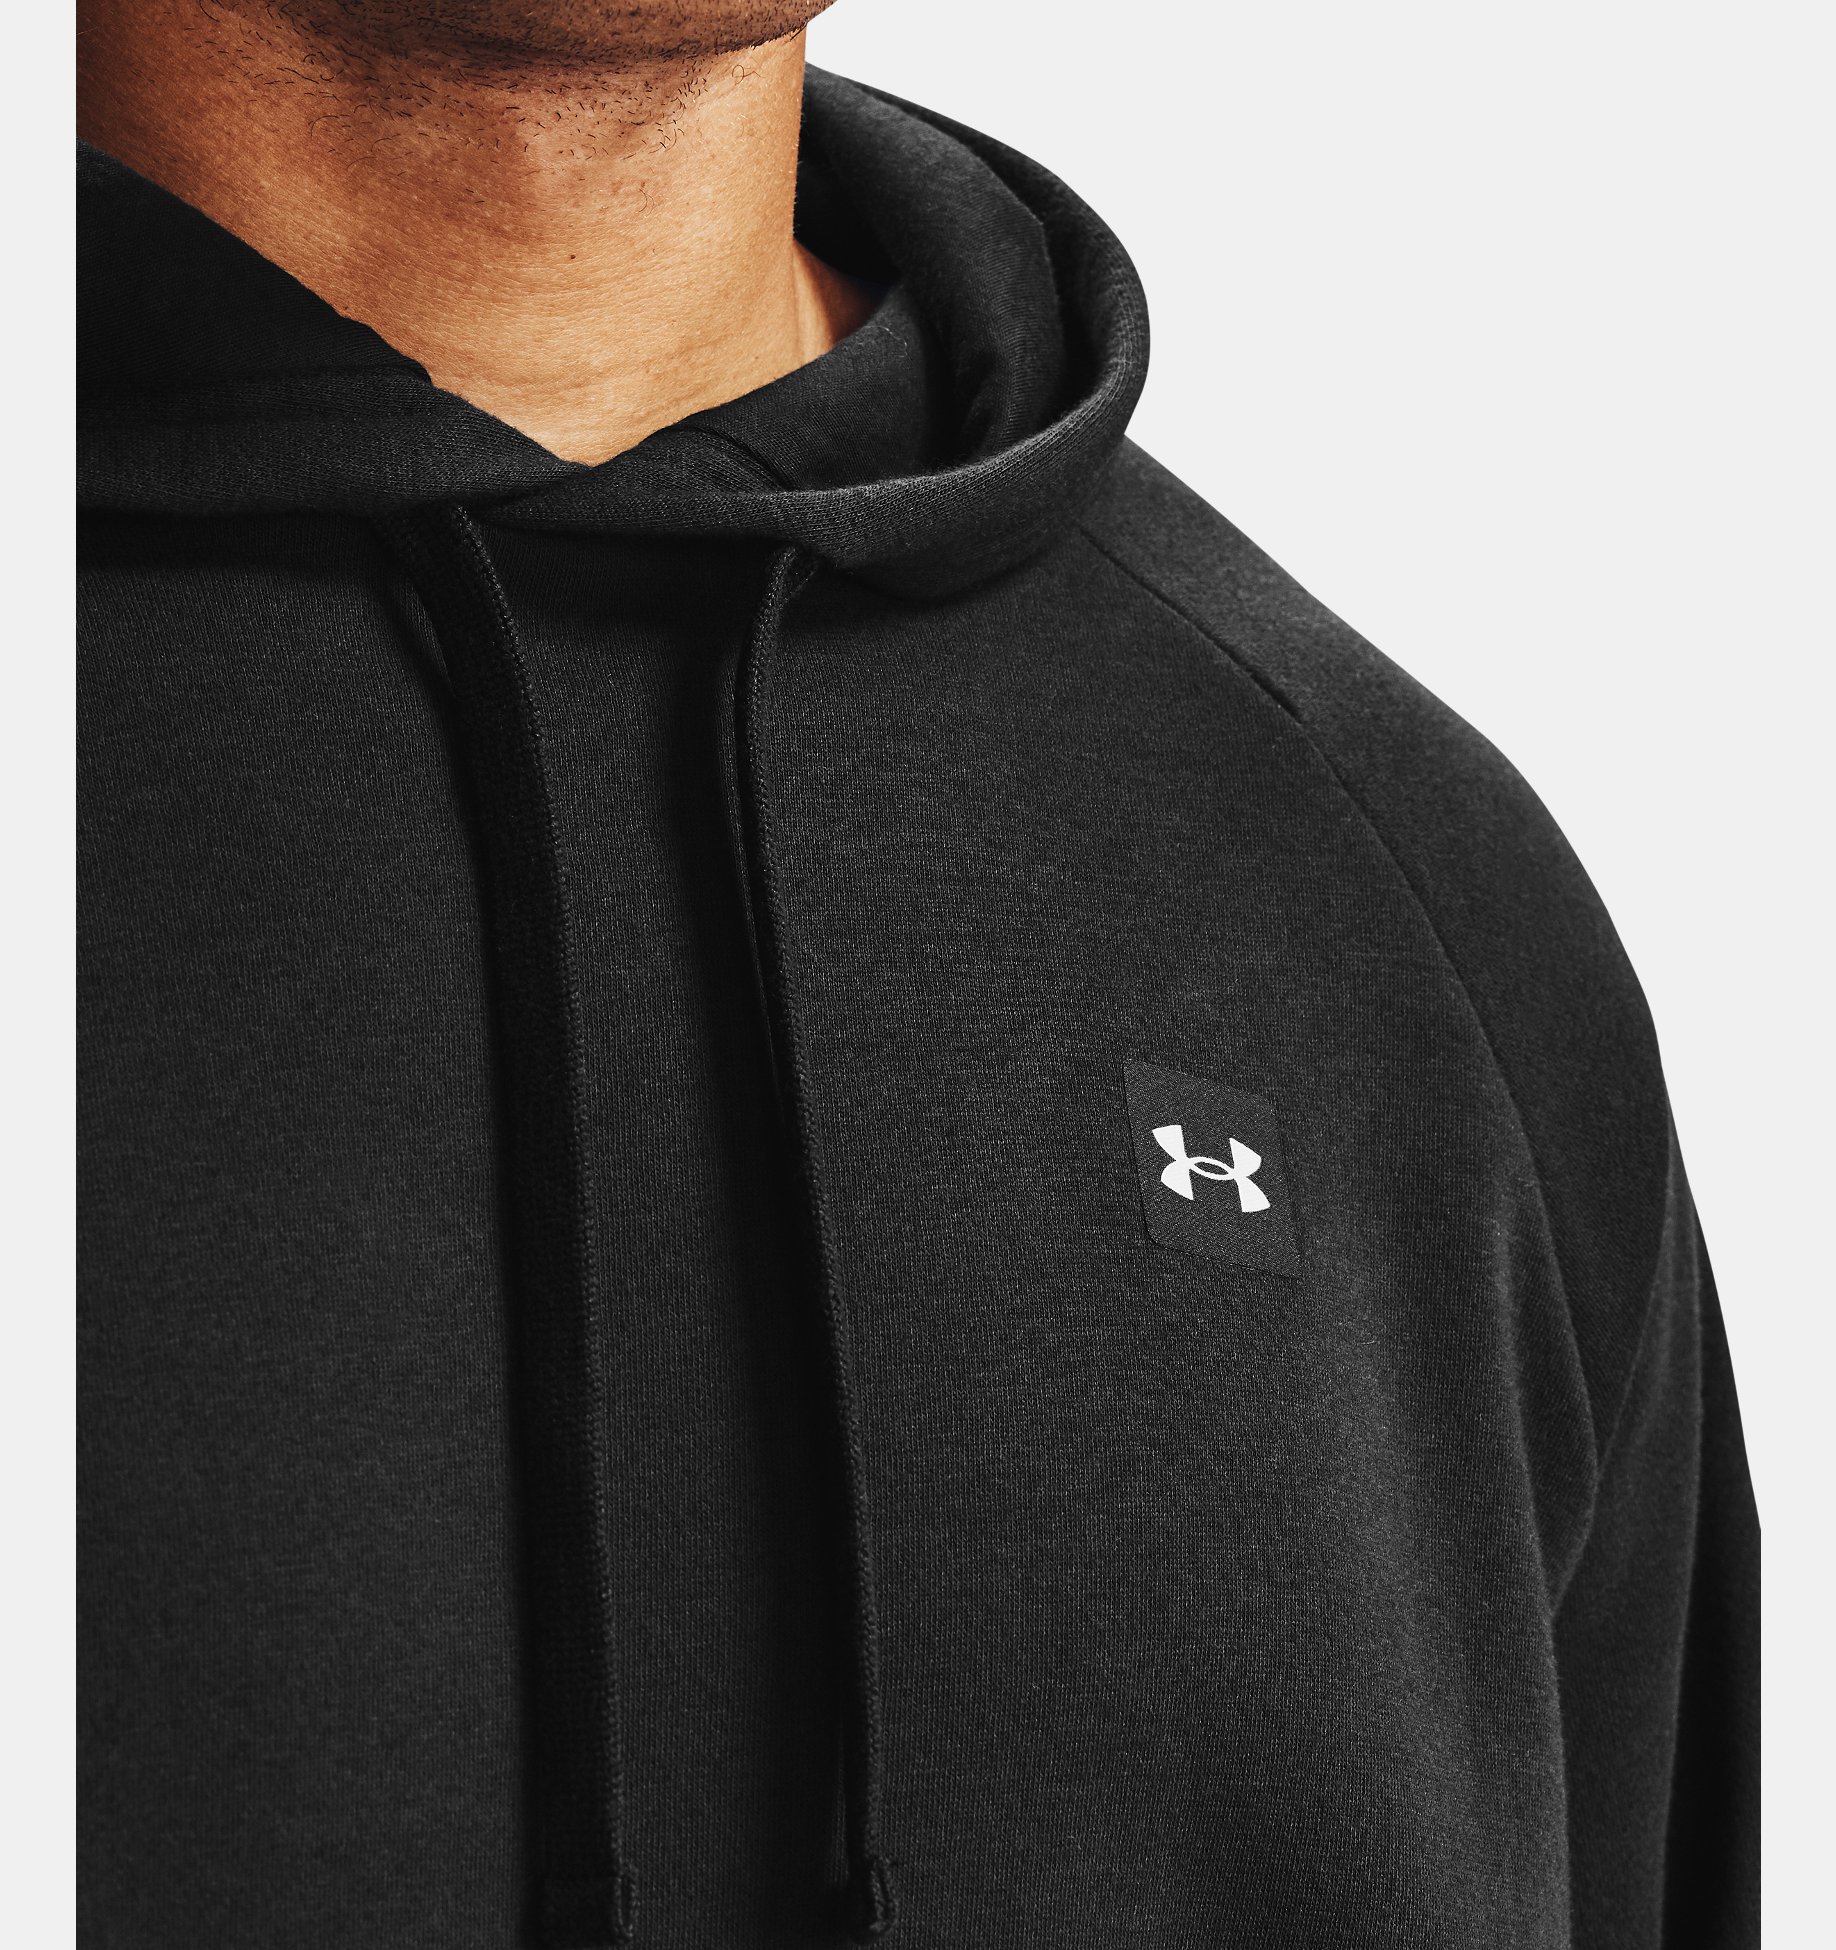 Under Armour Mens Rival Fleece Hoodie Black Sports Gym Breathable Lightweight 